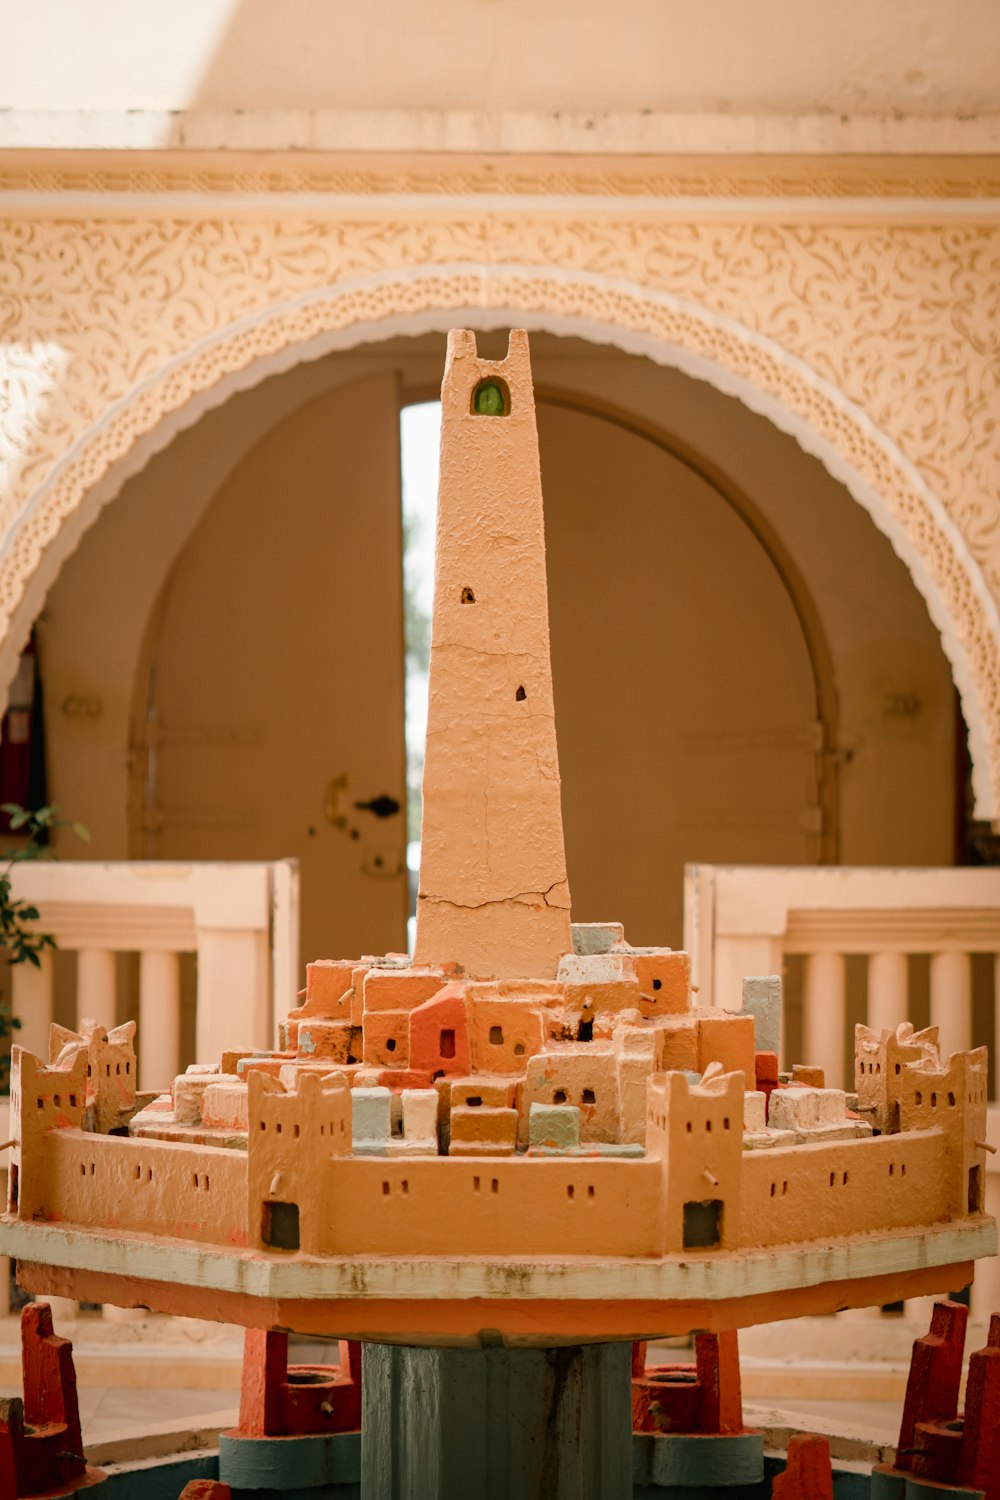 a model of a city with a tower in the middle of it